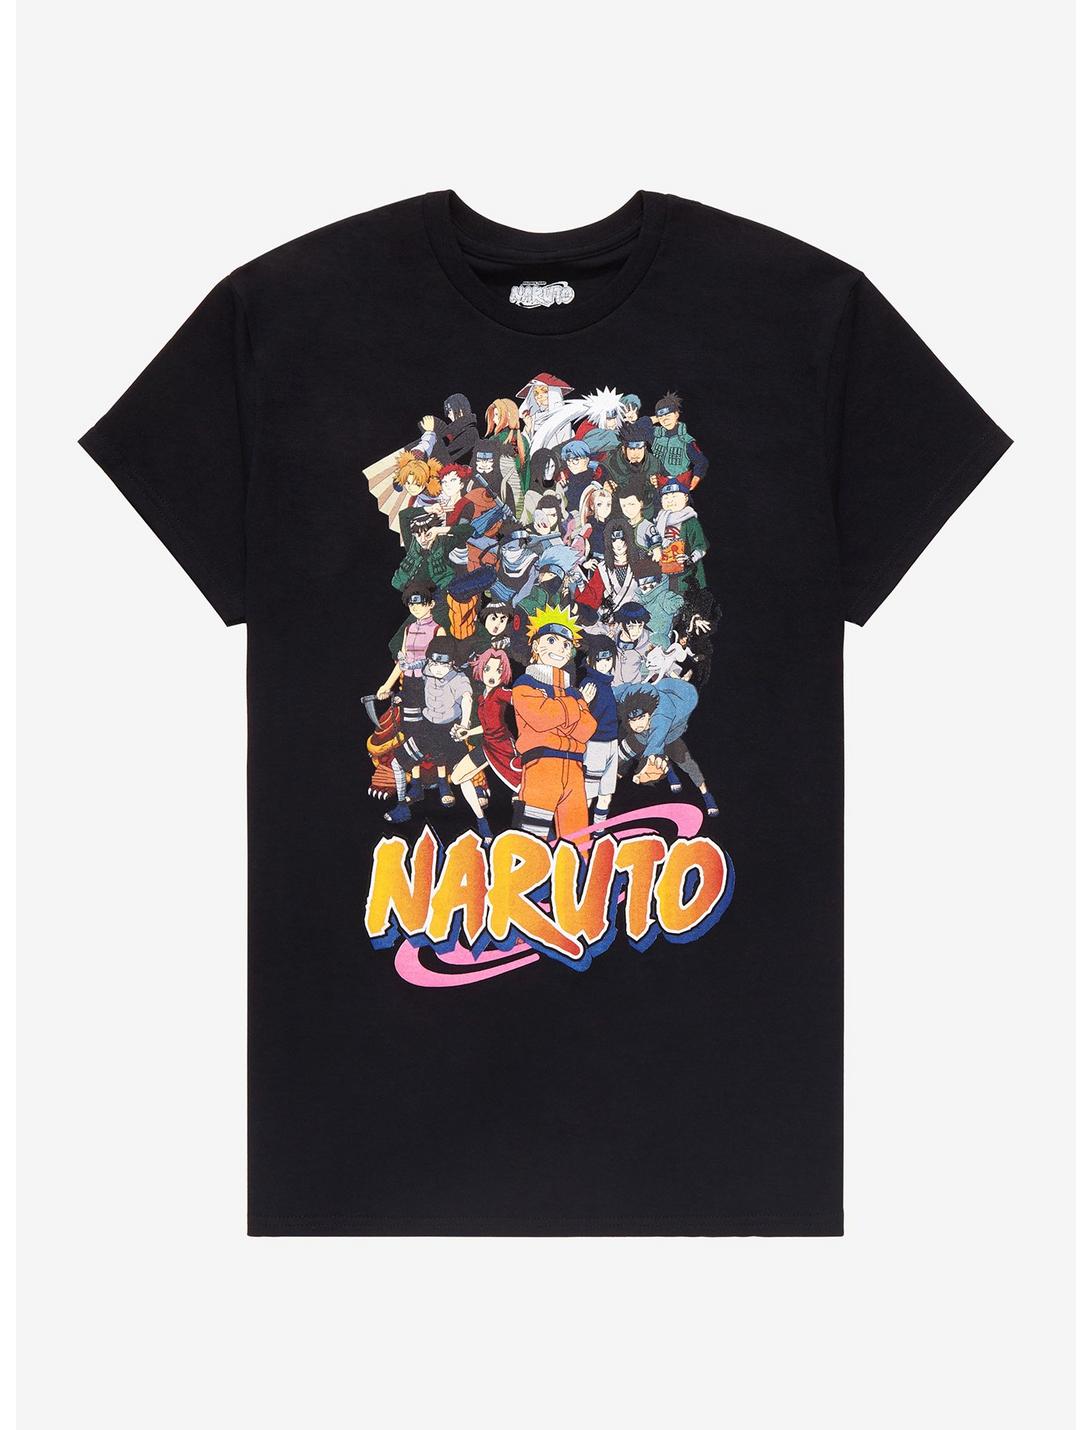 Naruto Classic Group Collage T-Shirt, BLACK, hi-res